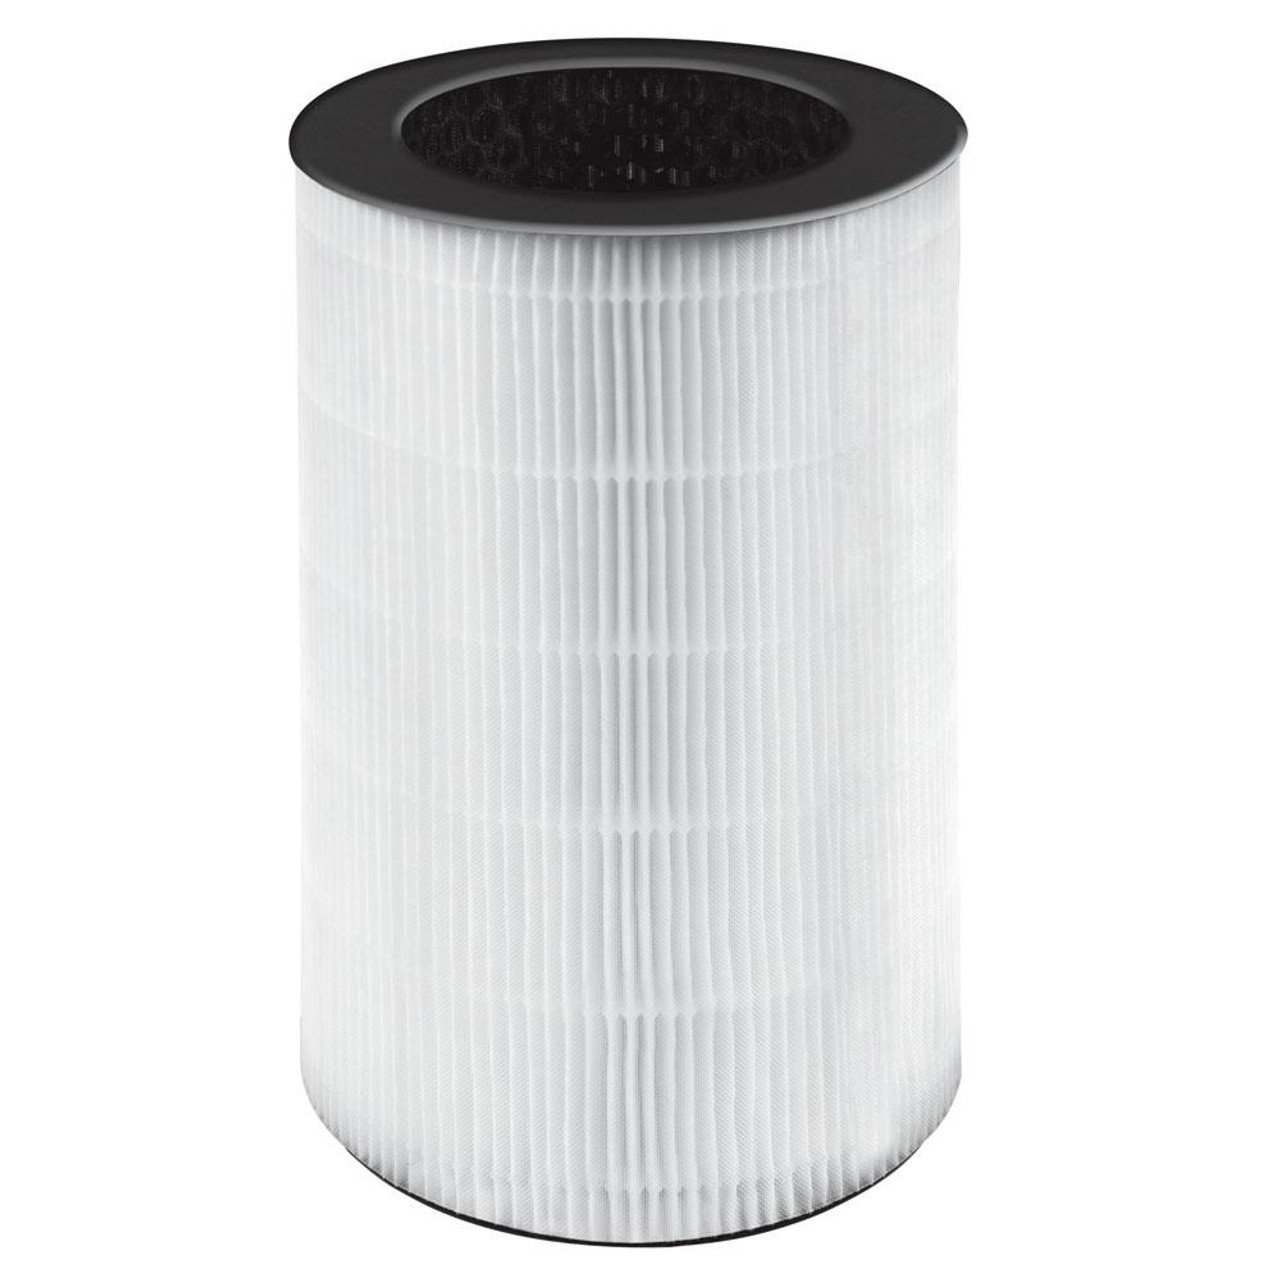 Replacement 360 HEPA Filter for AP-T30